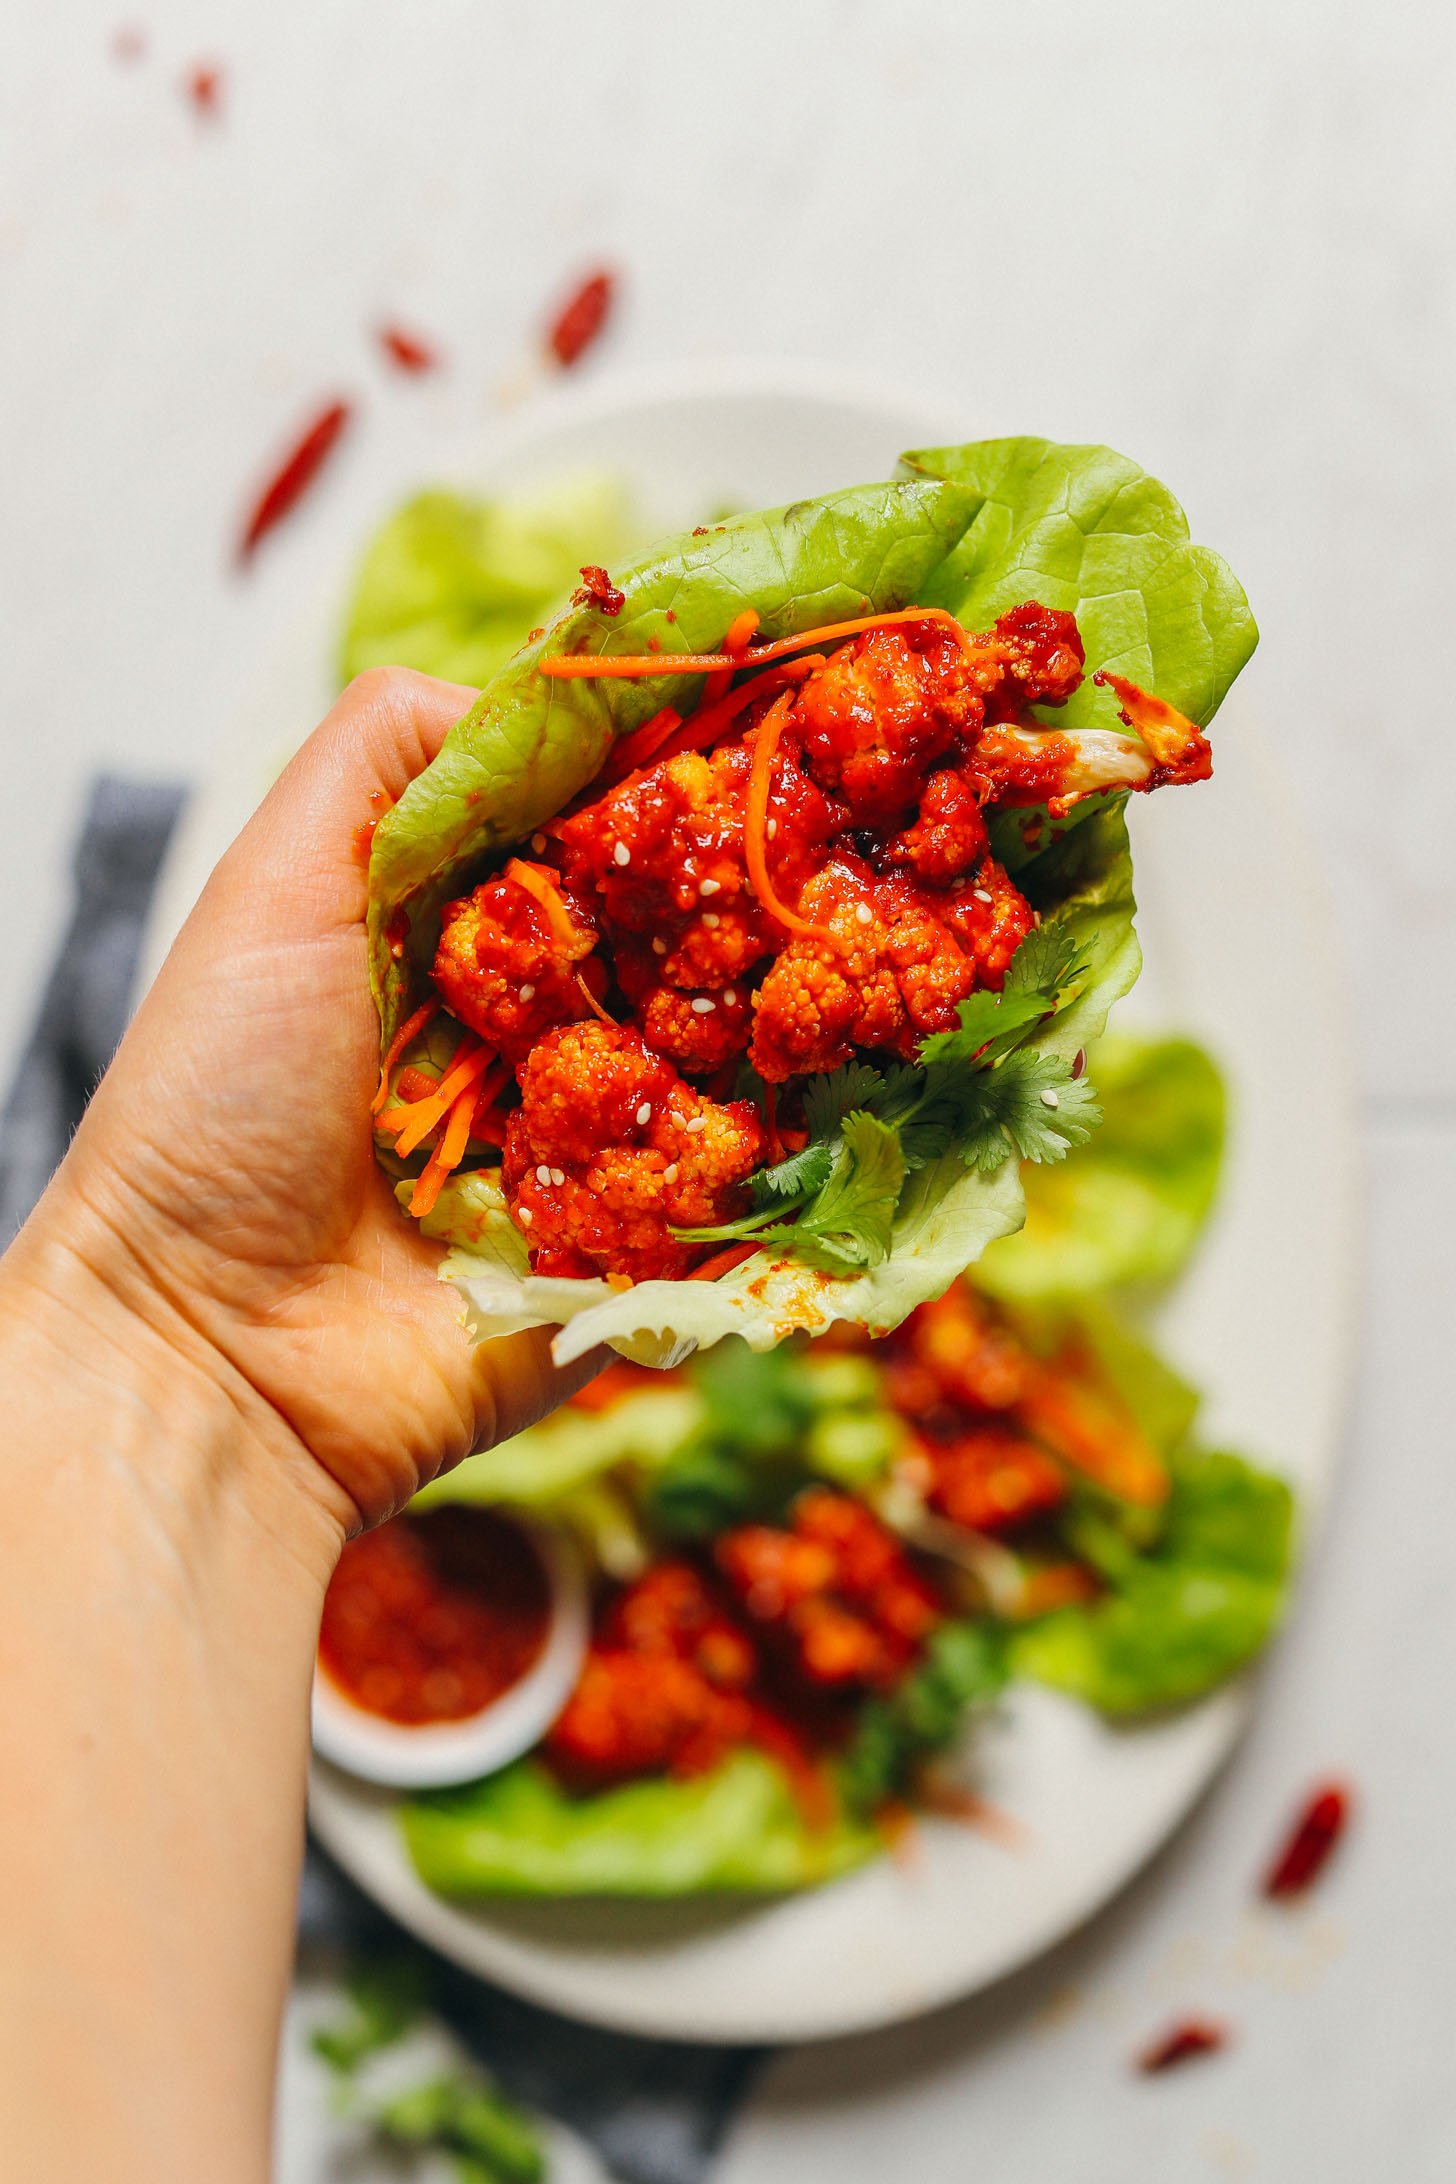 Holding a butter lettuce leaf stuffed with Korean-Spice Cauliflower Wings, shredded carrots, and fresh cilantro